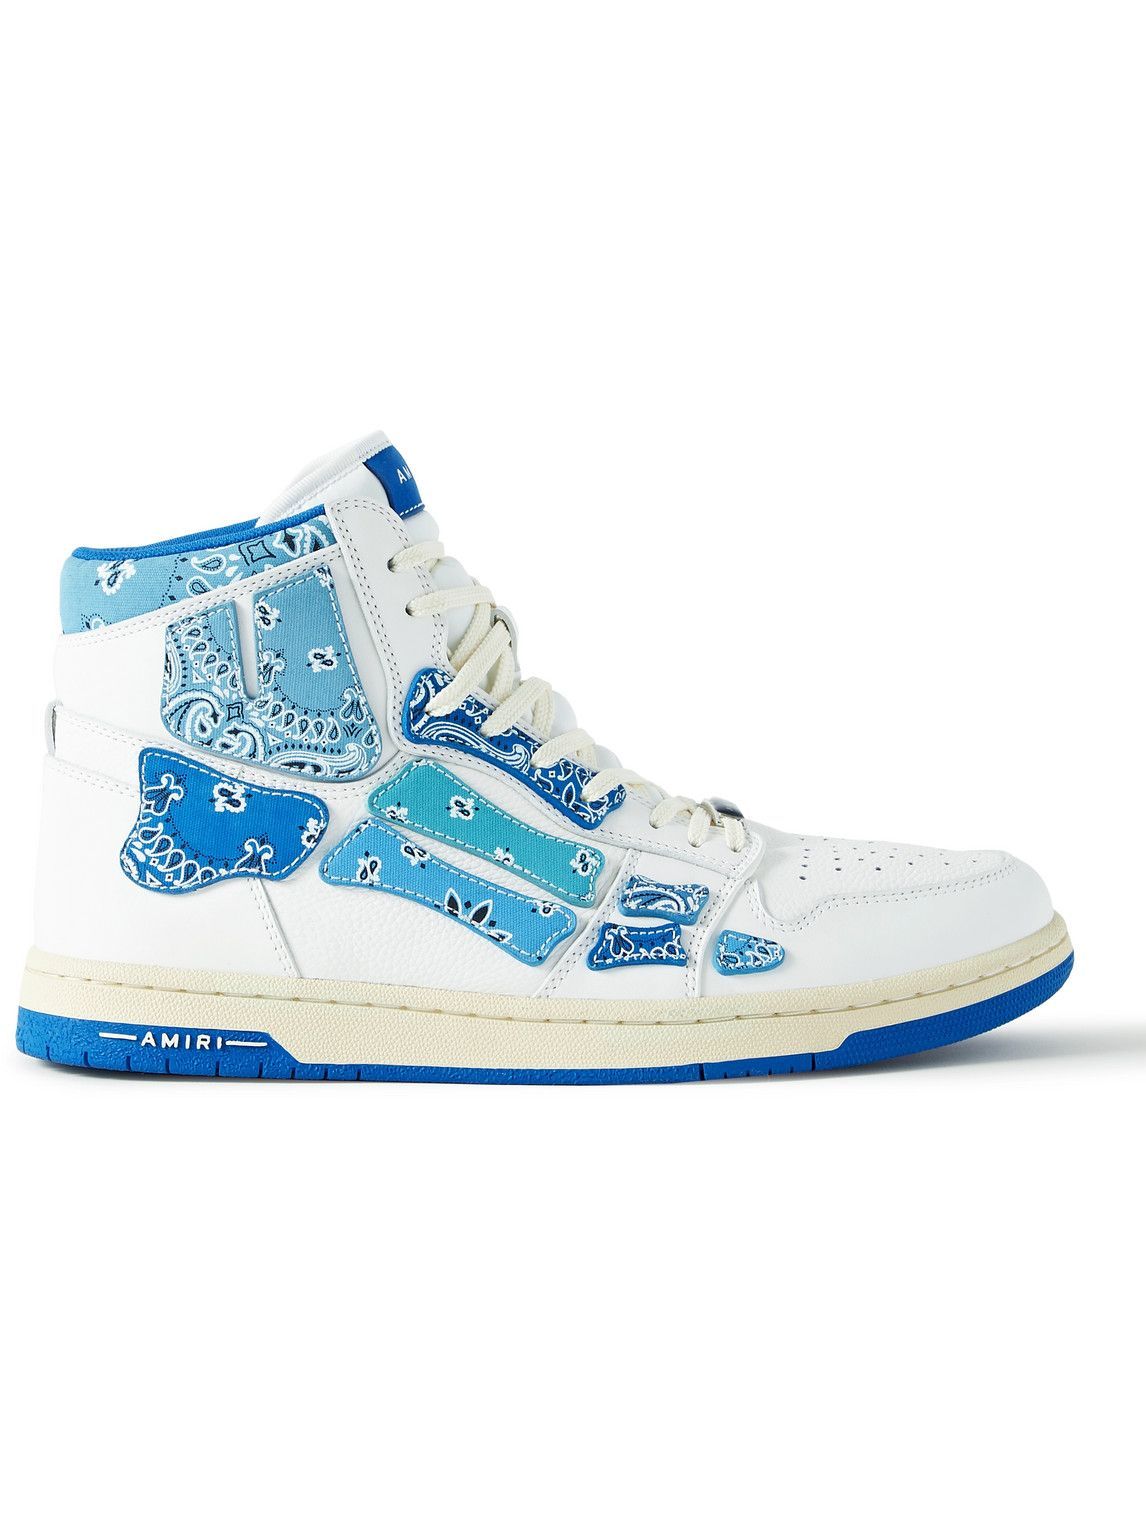 AMIRI - Skel-Top Bandana-Print Canvas and Leather High-Top Sneakers ...